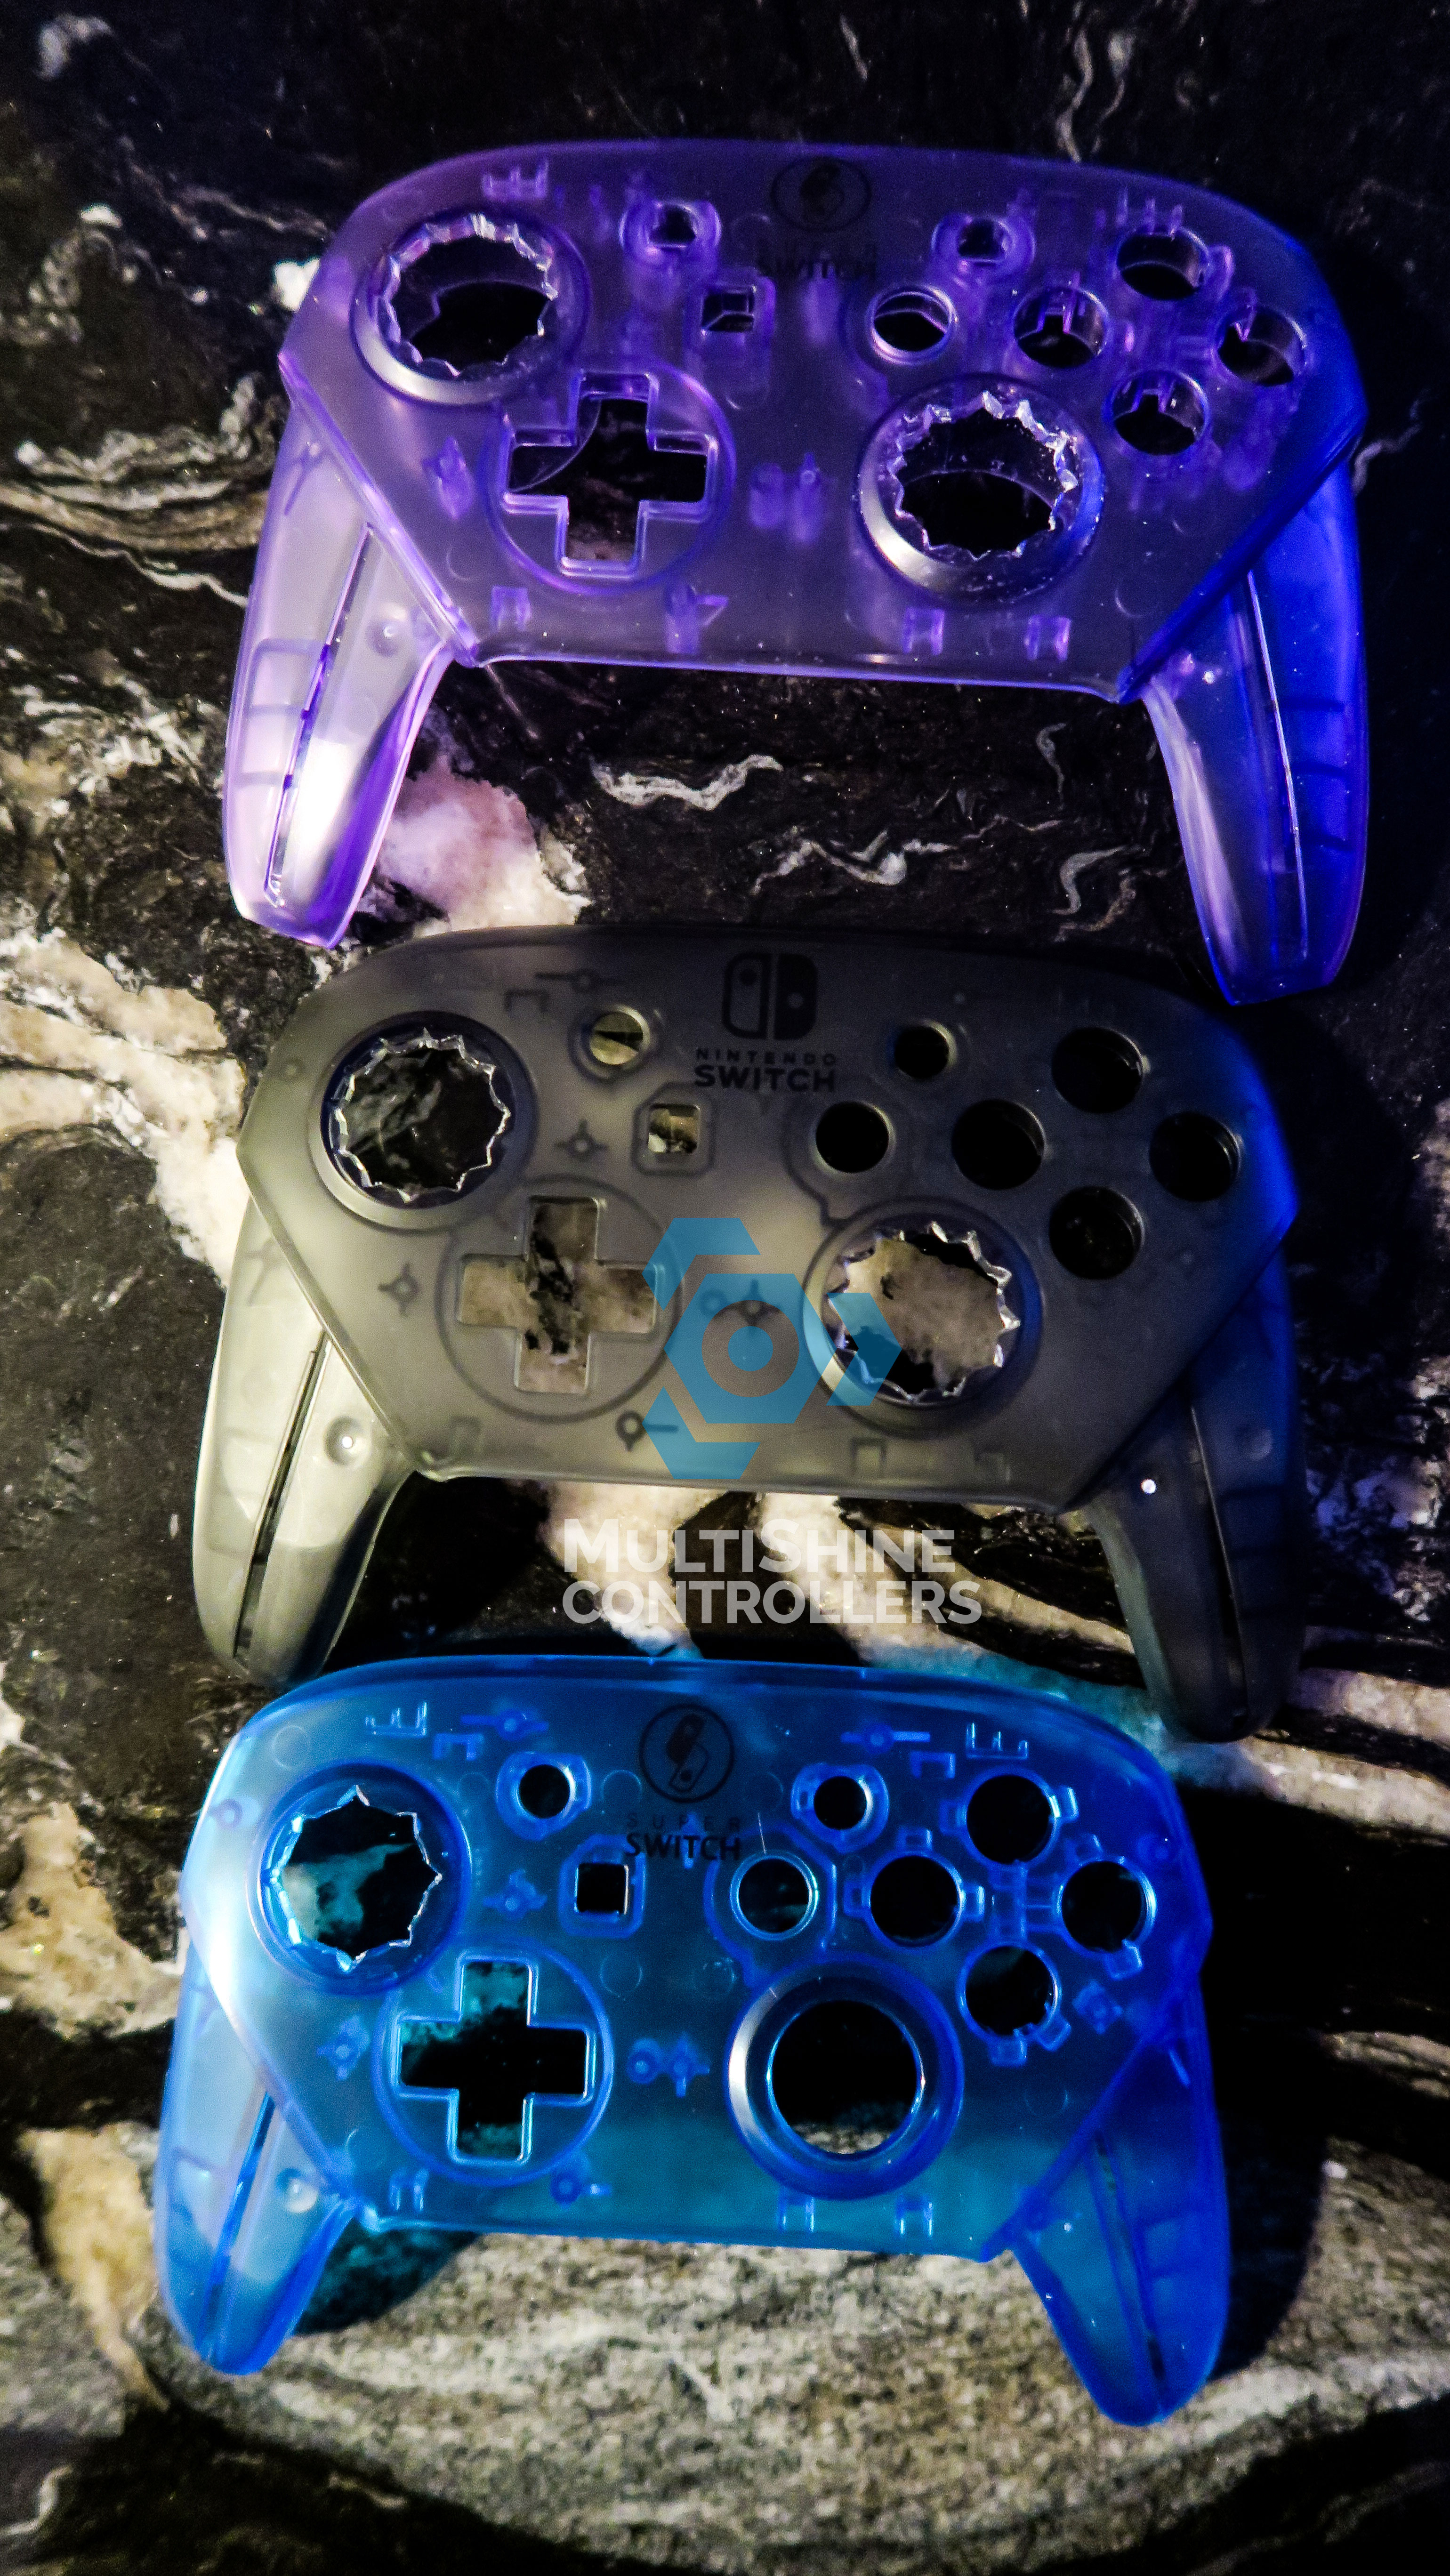 pro controller shell